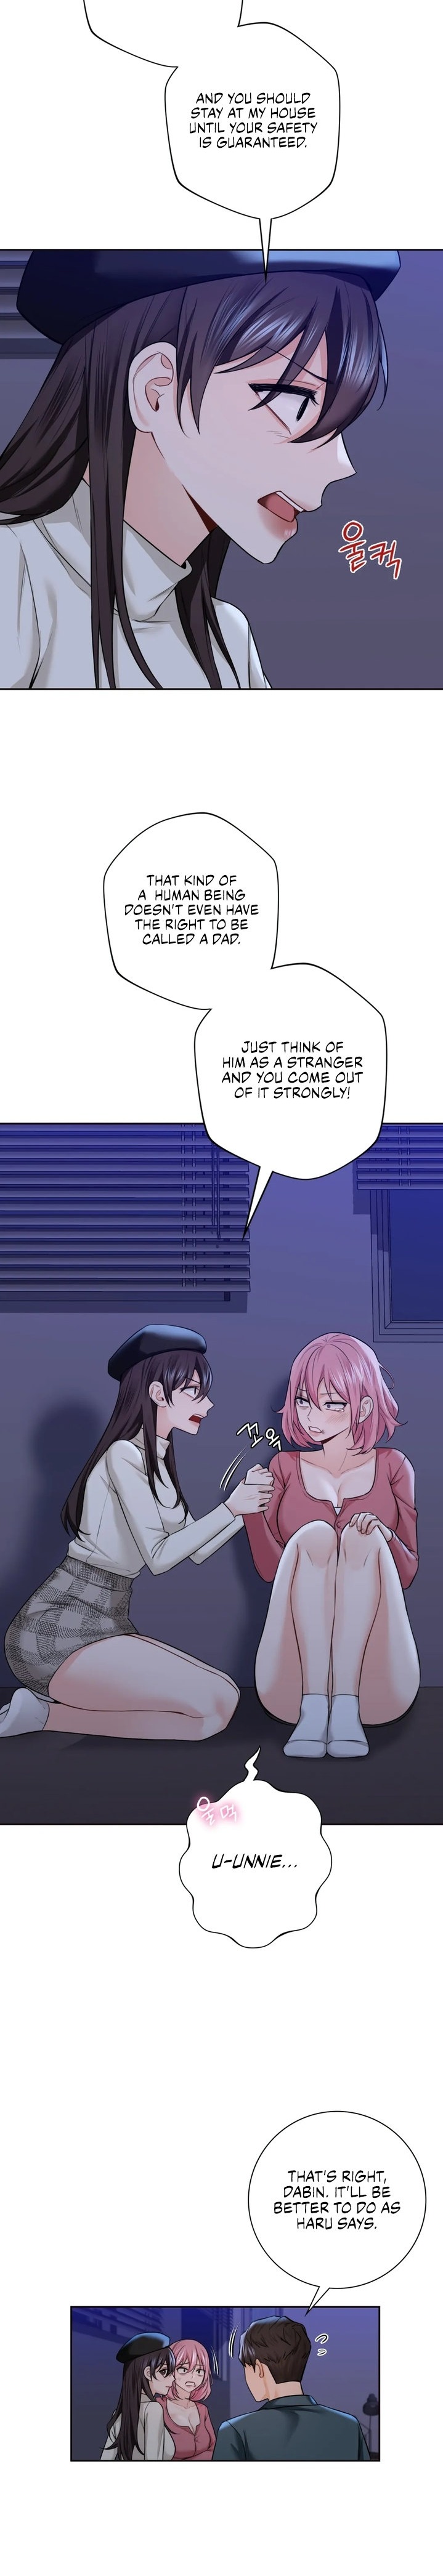 Not a friend – What do I call her as? - Chapter 25 Page 15